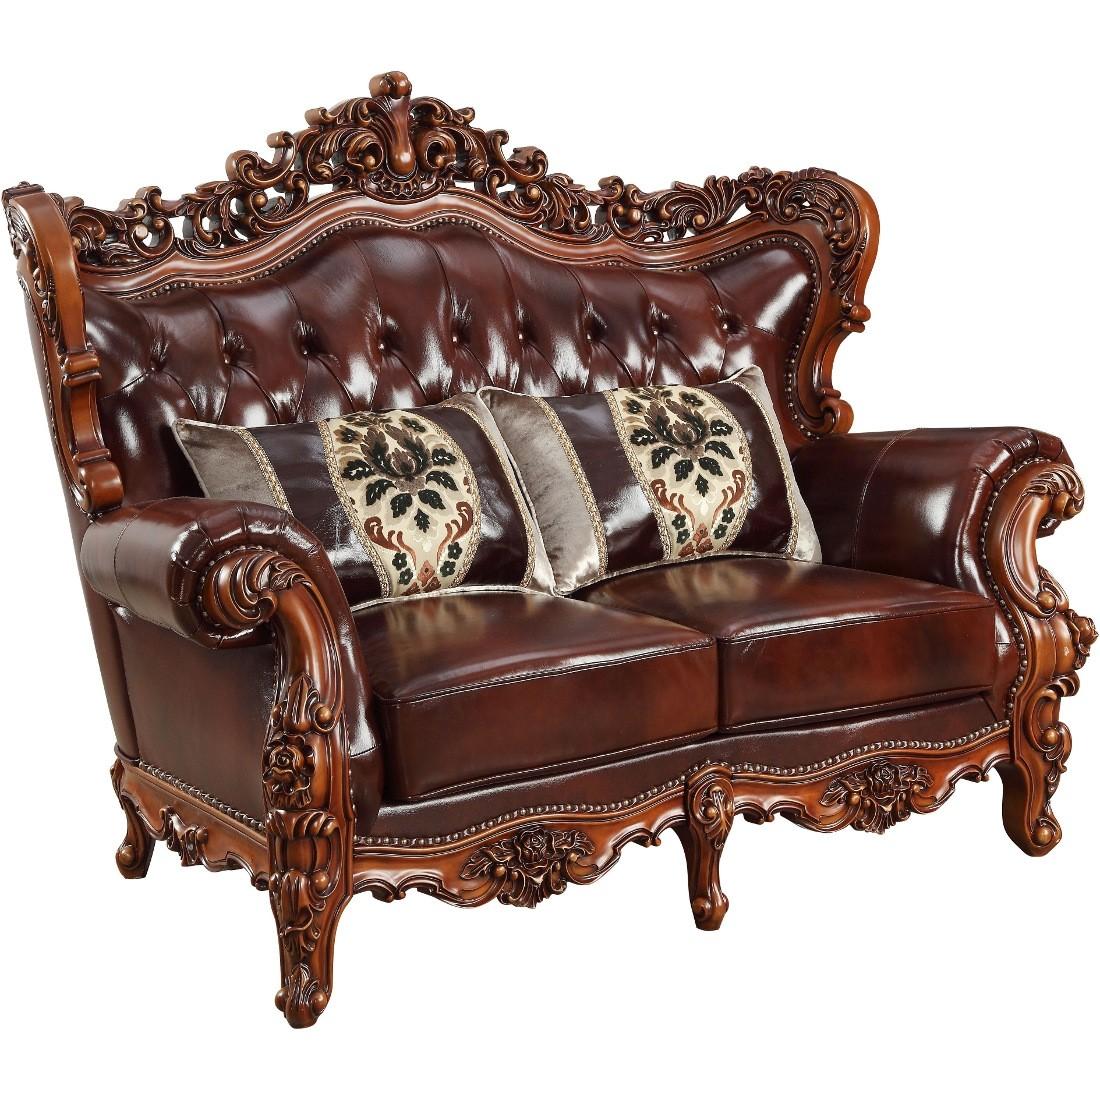 Classic, Traditional Loveseat Eustoma-53066 Eustoma-53066 in Cherry, Walnut Top grain leather